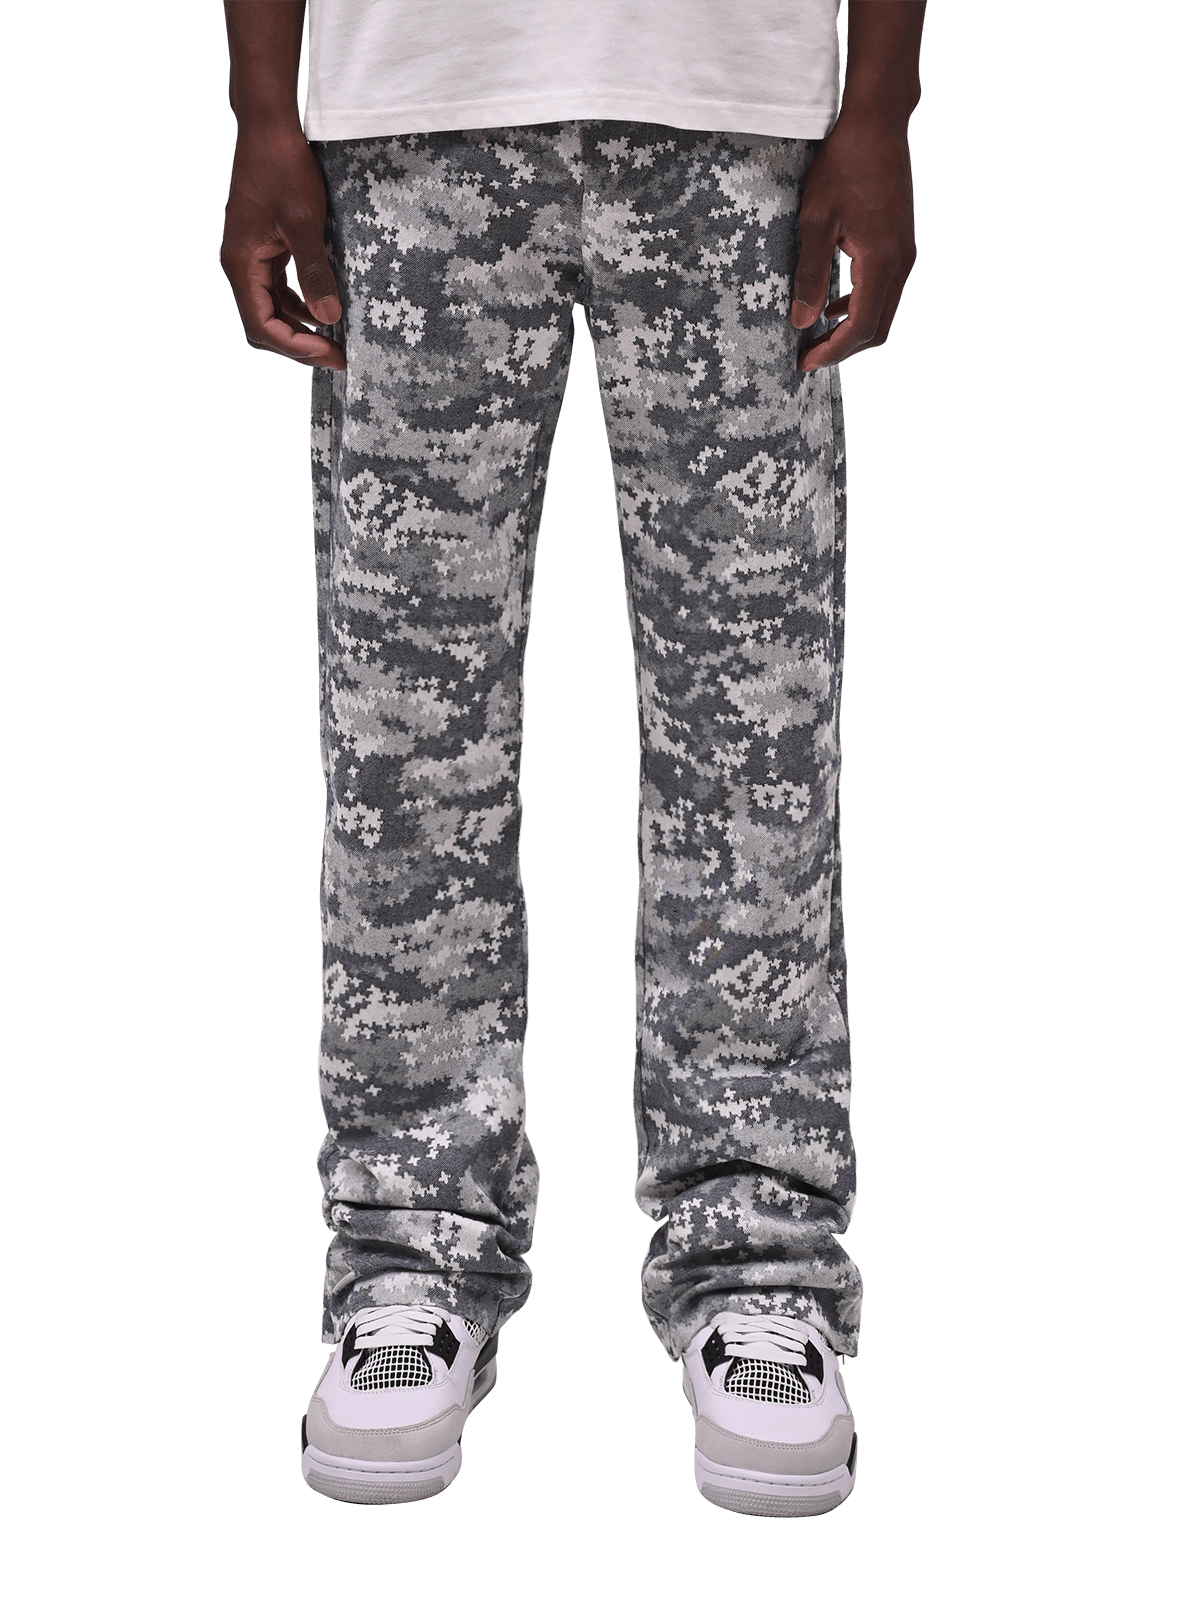 Flare Tapestry Pants -  Pixel Stone